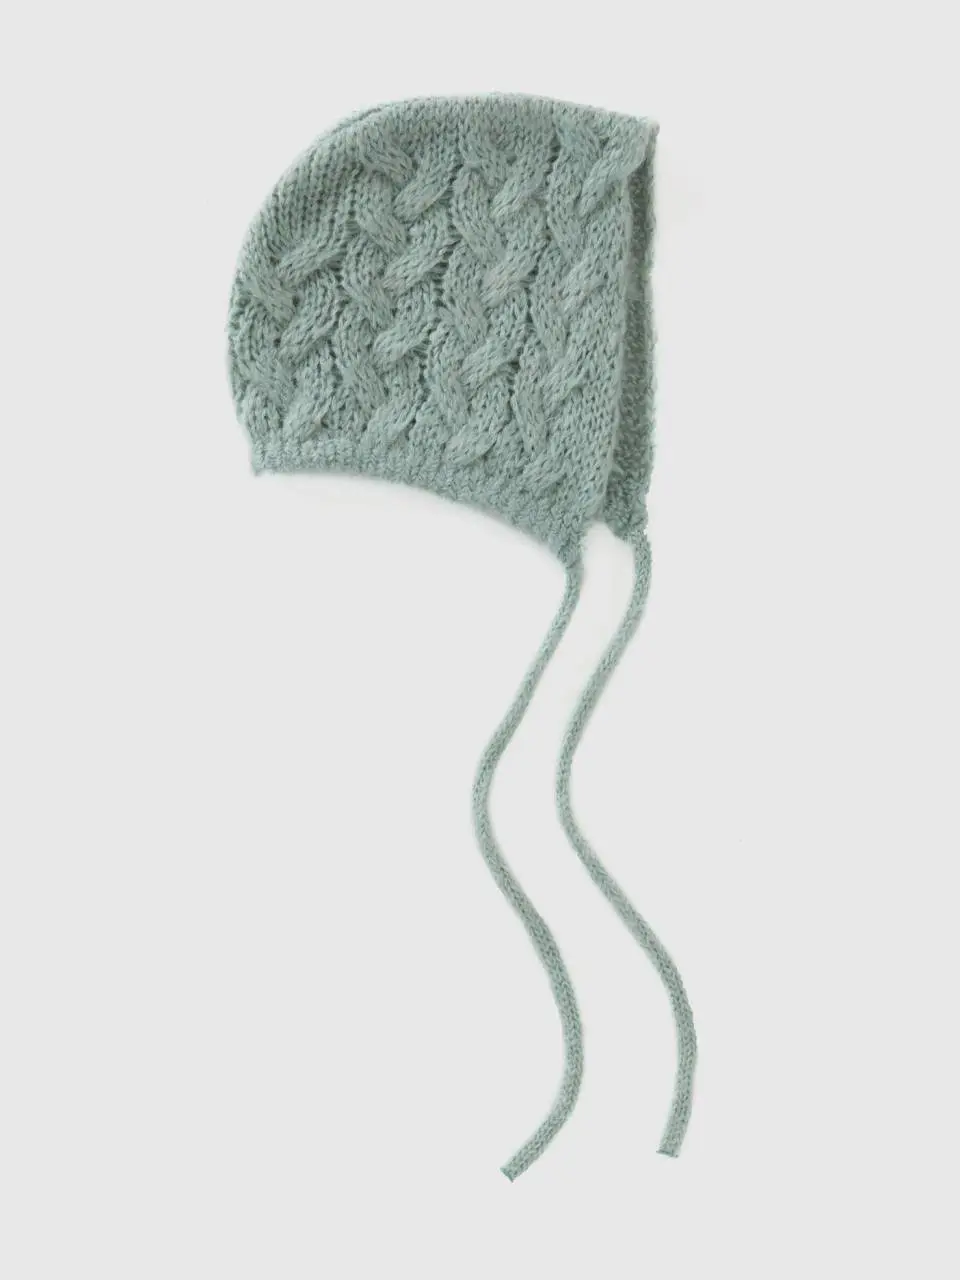 Benetton knit cap with cables. 1